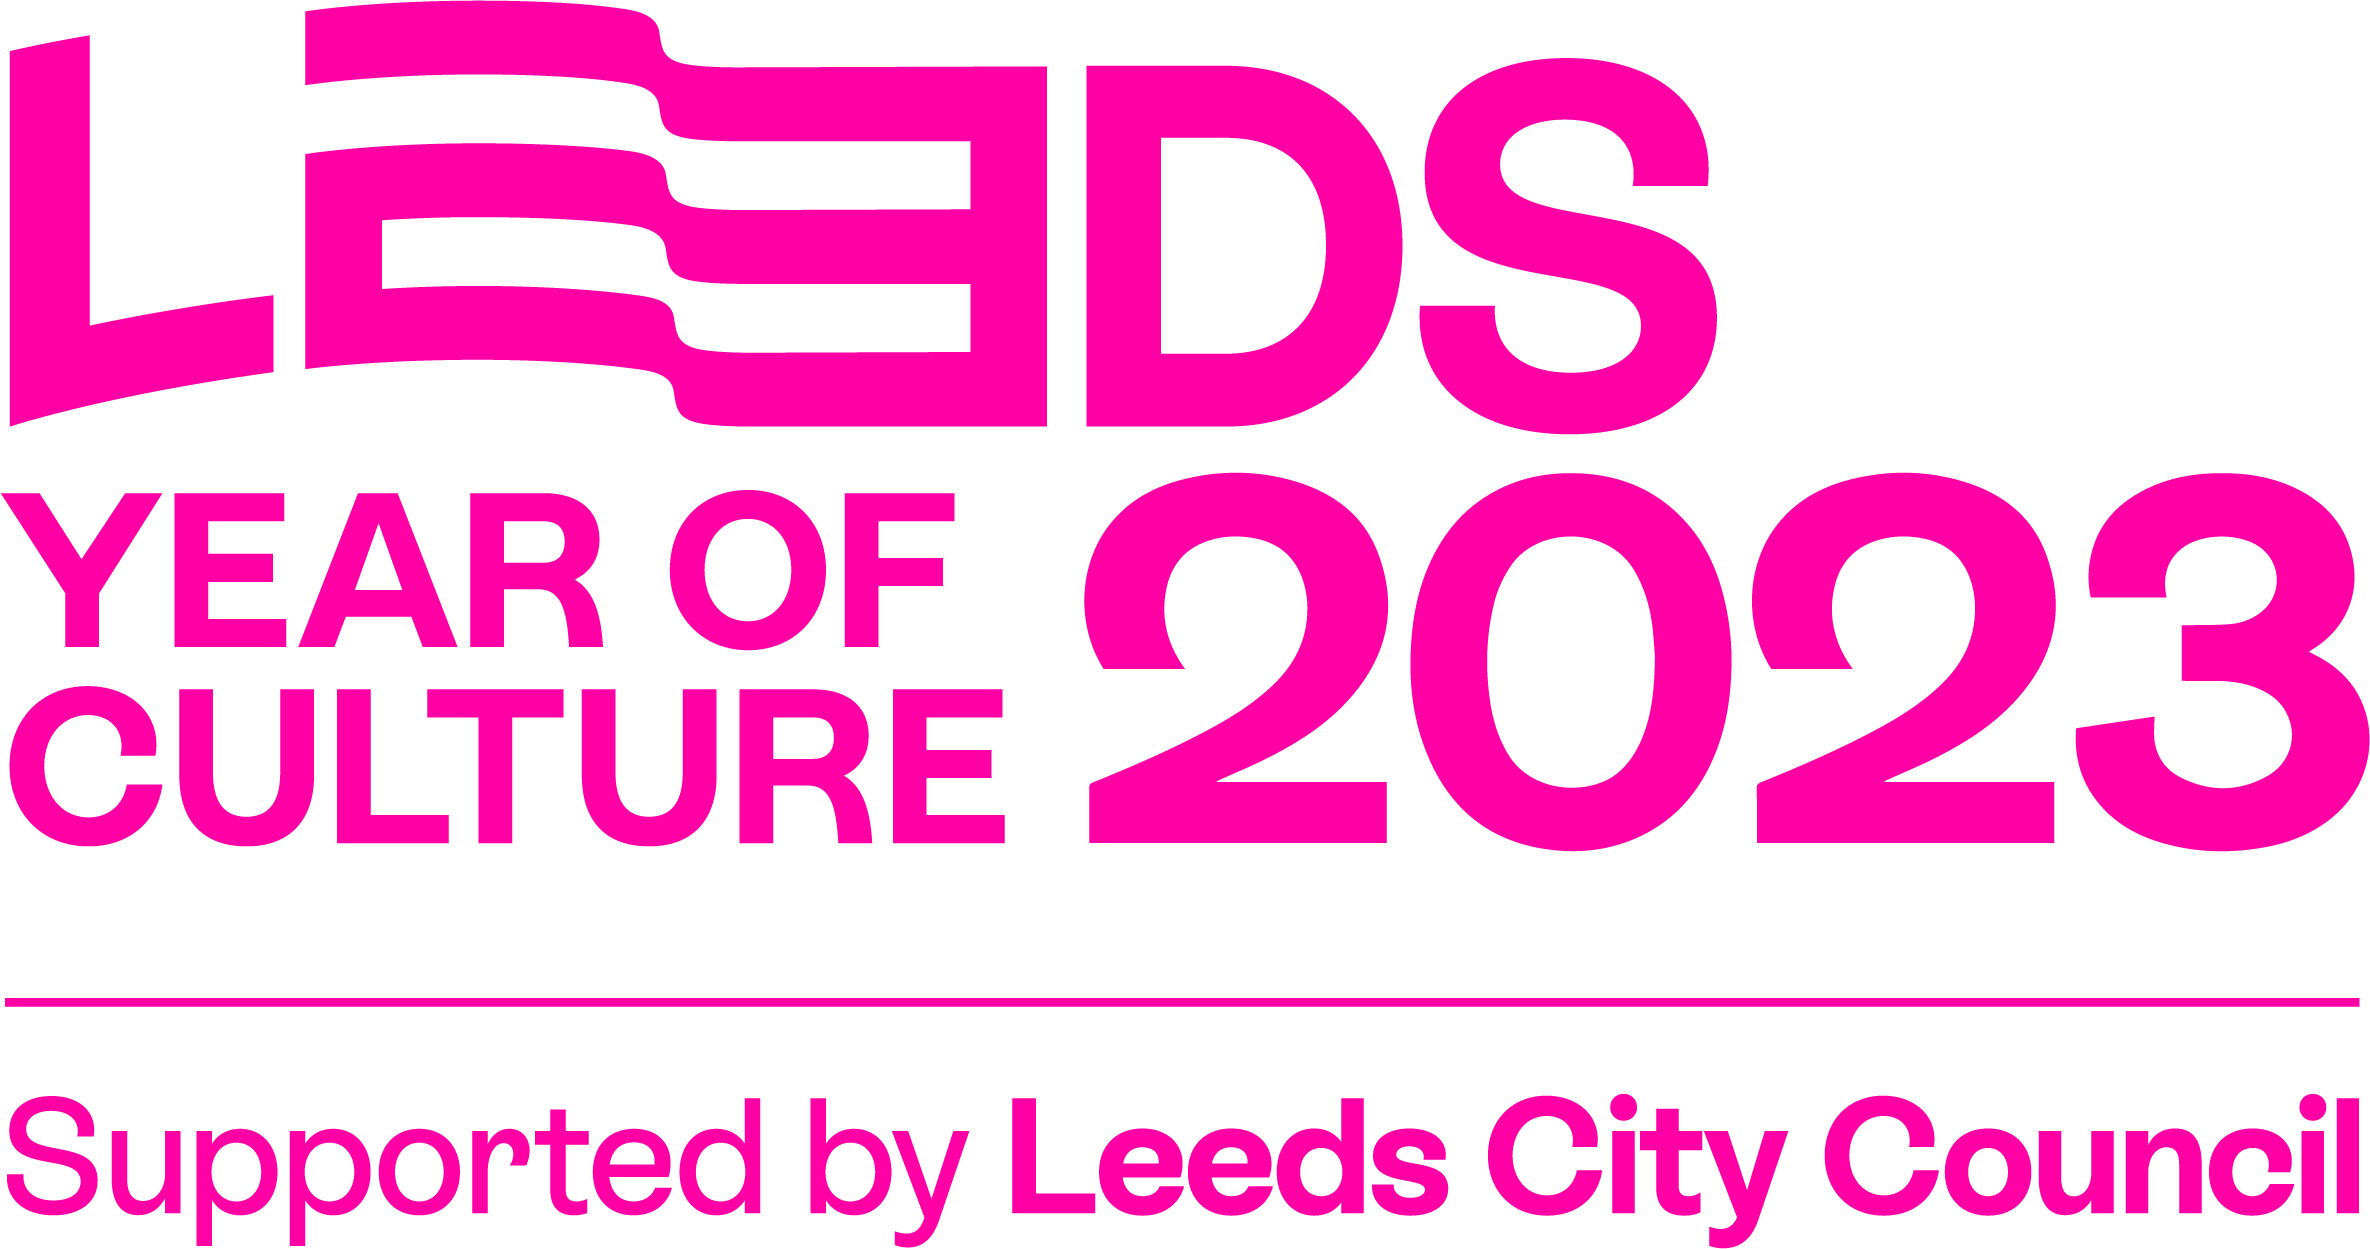 1412_leeds2023_logo_stacked_supported_lcc_pink_rgb.png